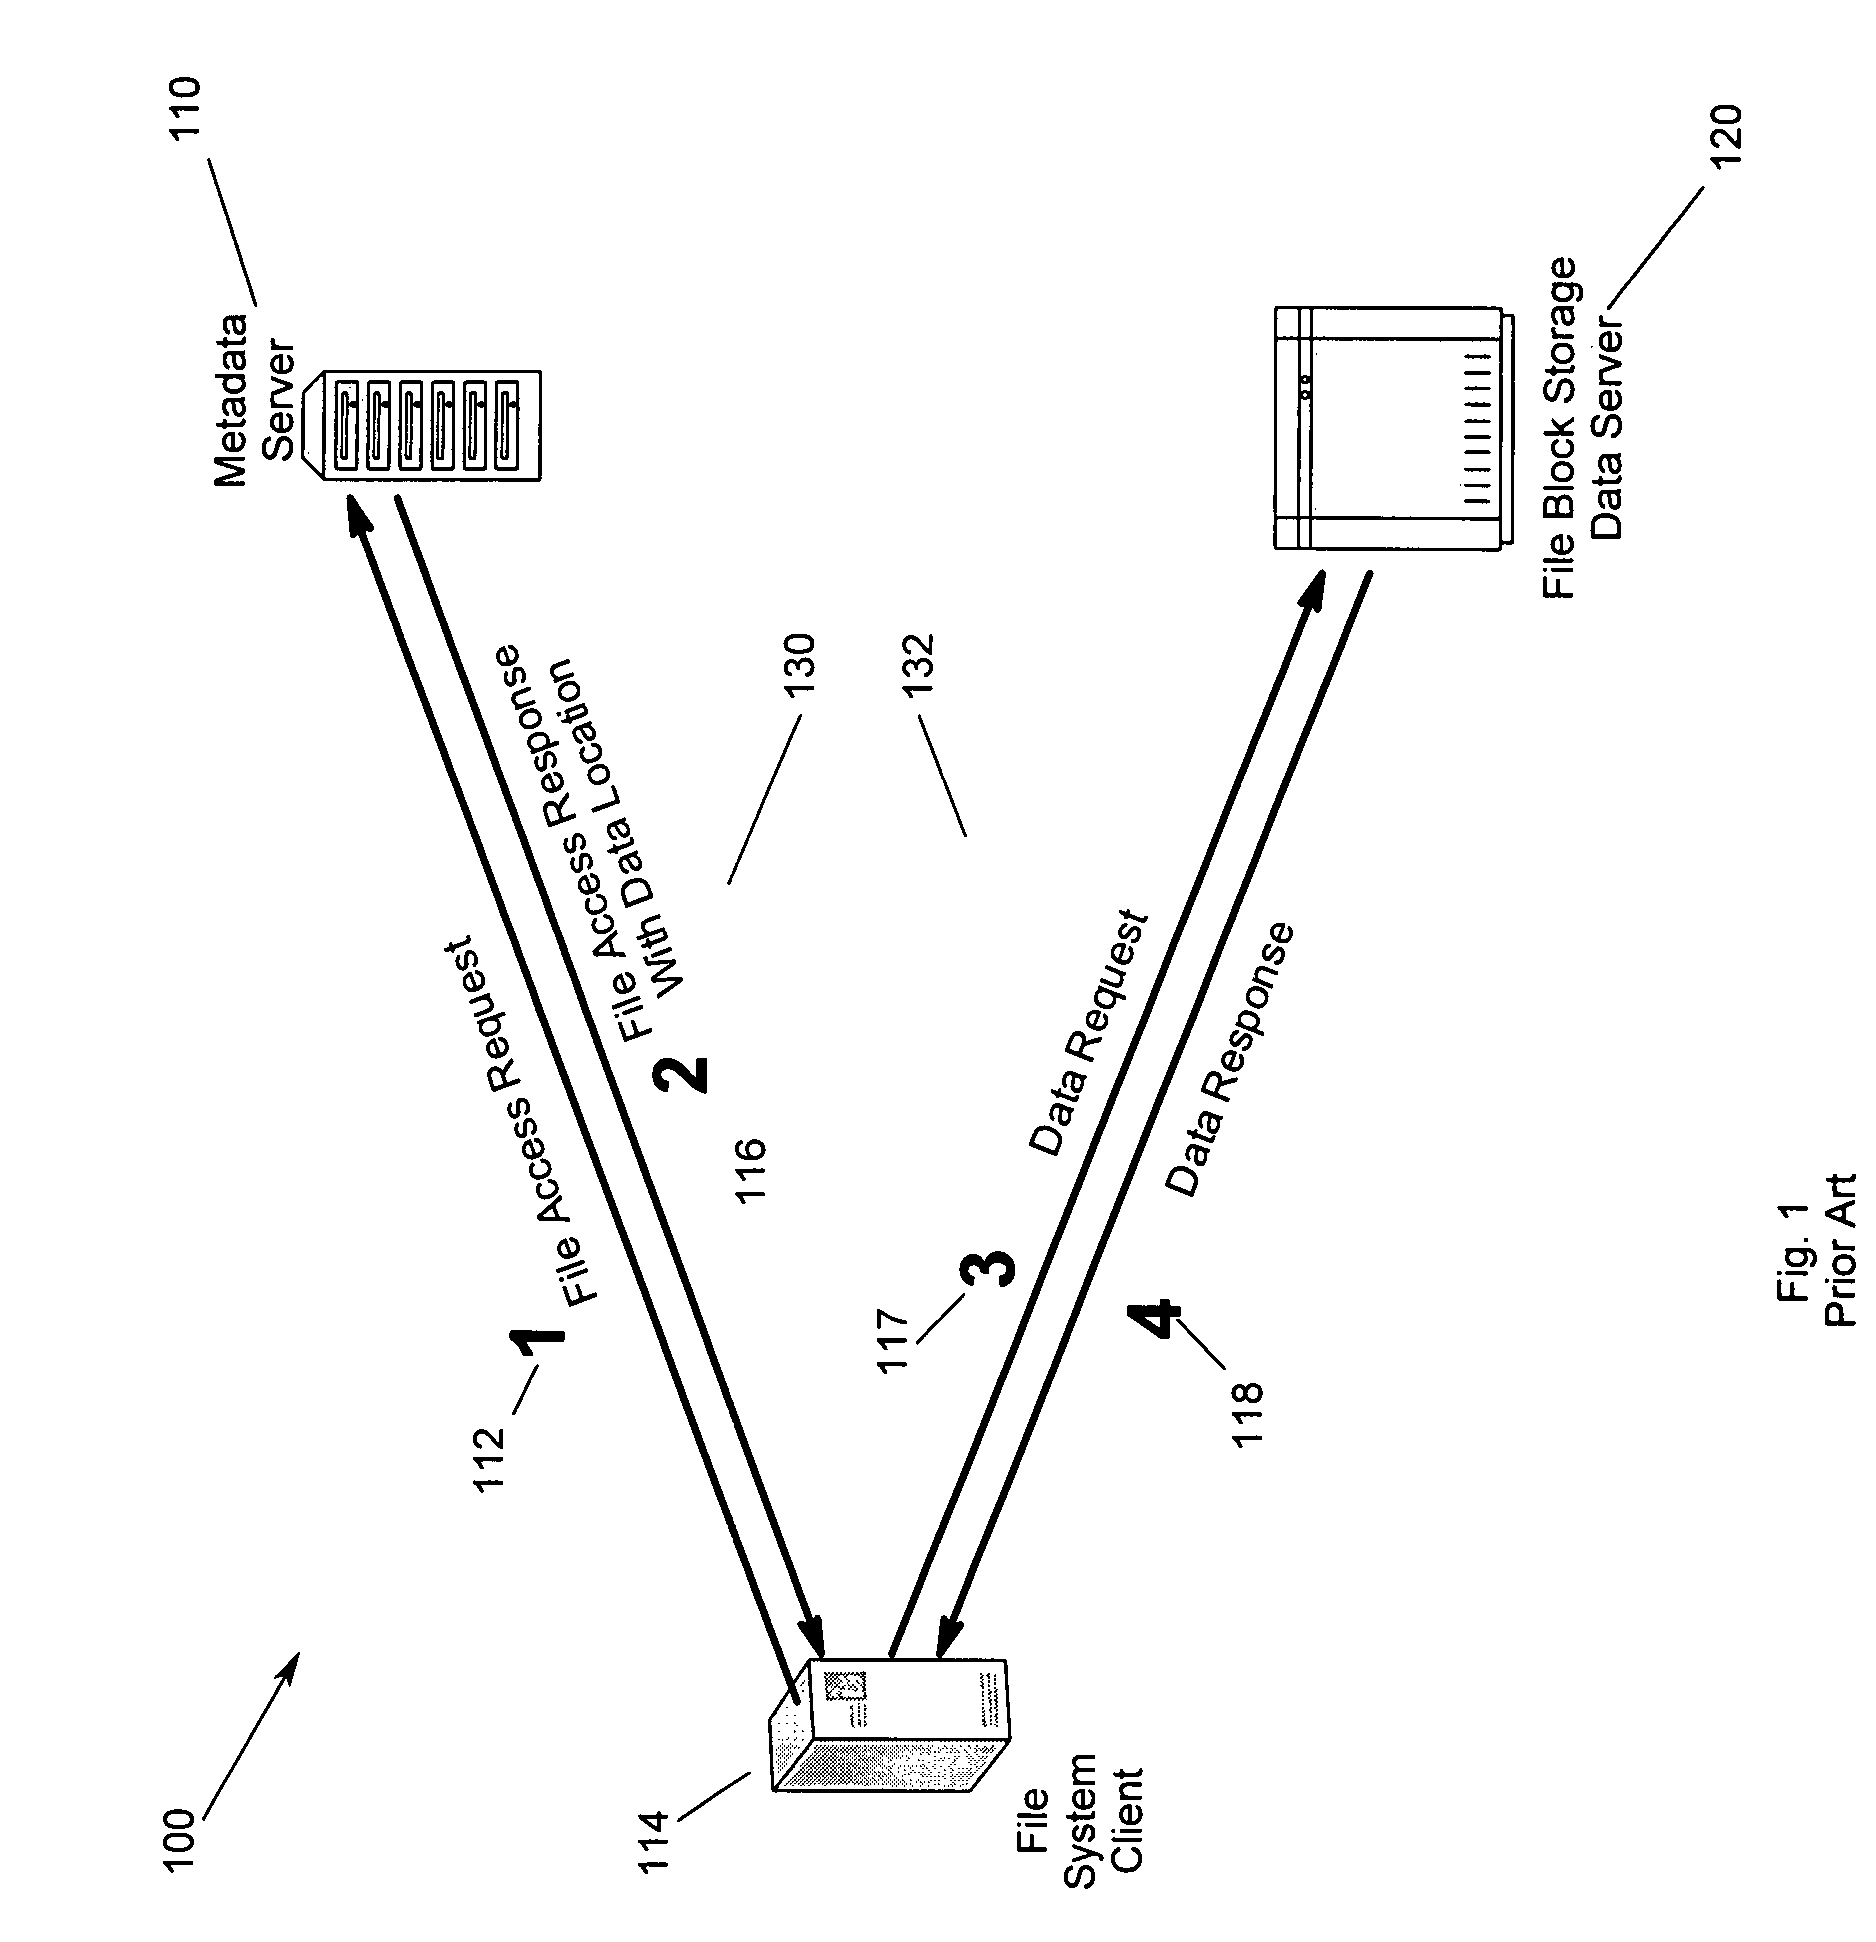 Distributed file serving architecture system with metadata storage virtualization and data access at the data server connection speed